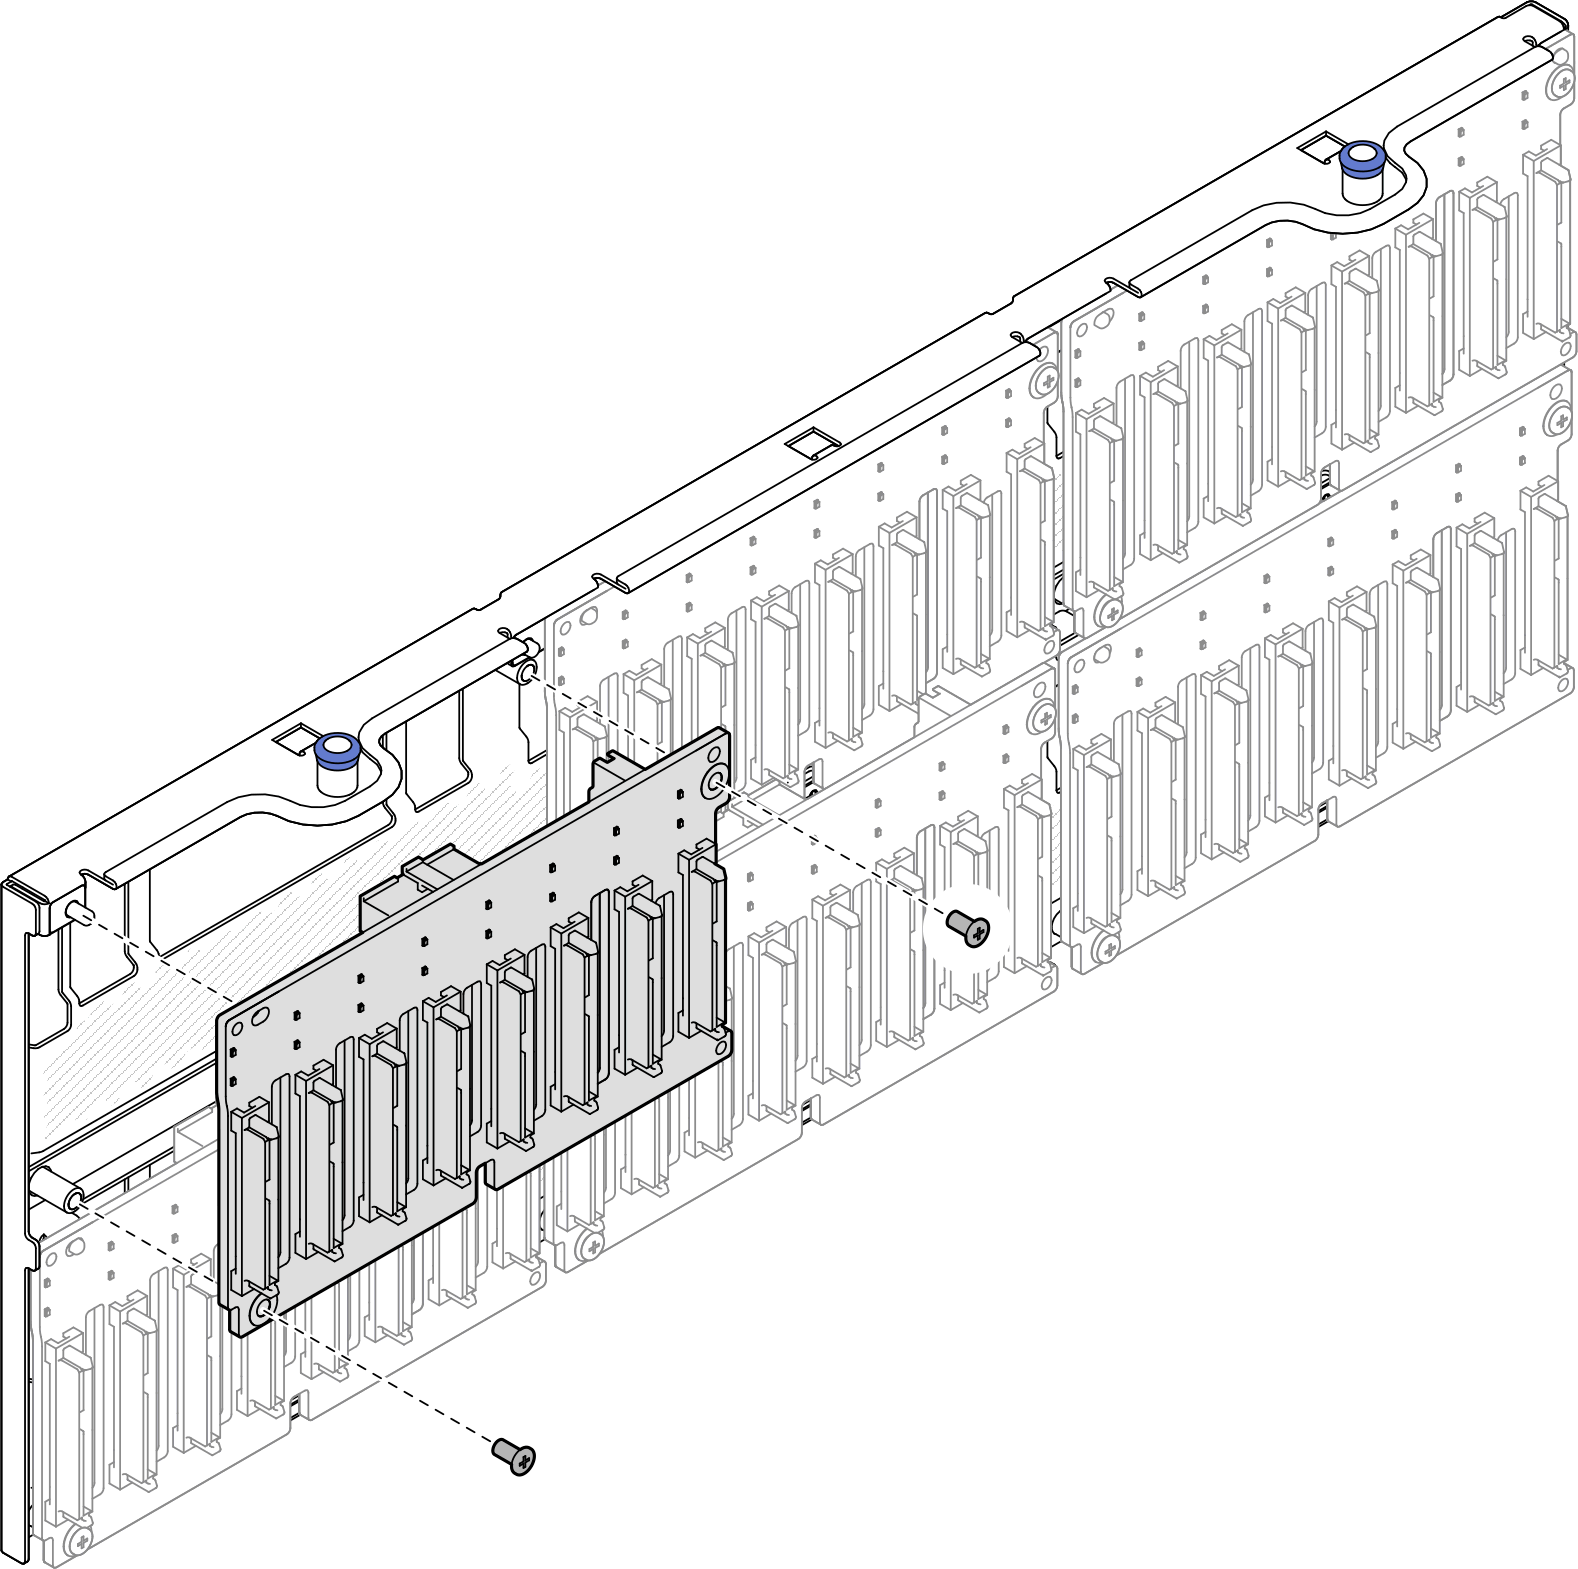 Installing backplane to carrier